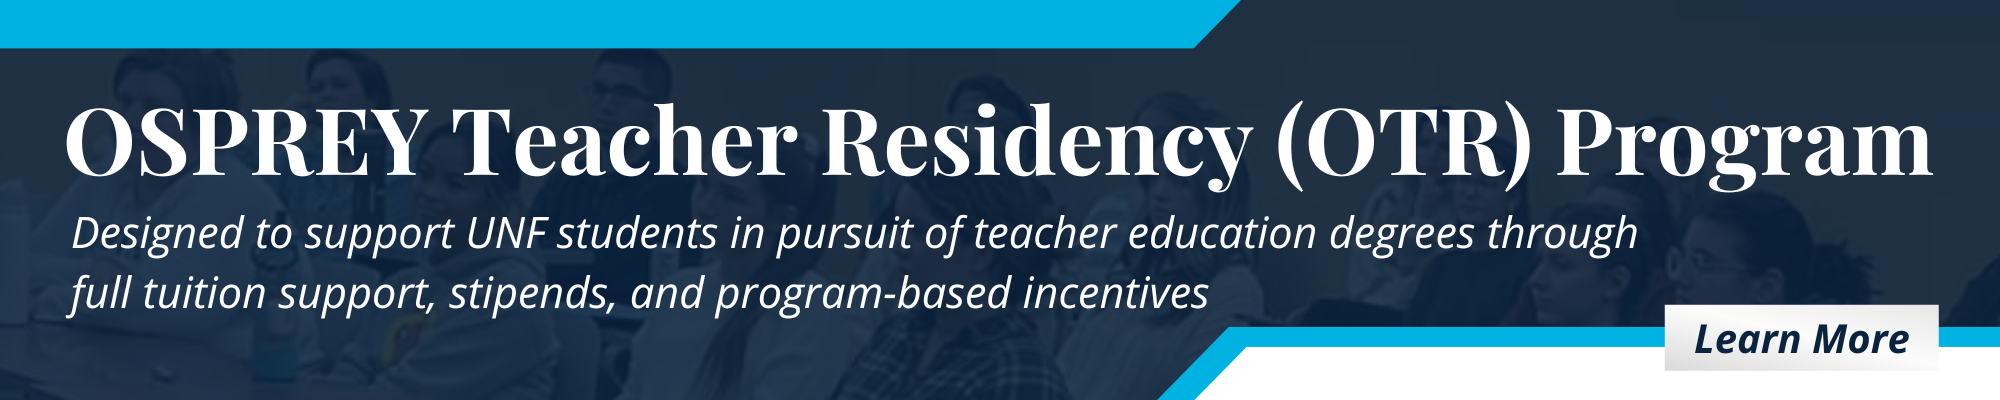 Dark blue graphic with text osprey teacher residency program, designed to support UNF students pursuing teacher education degrees with full tuition support and incentives